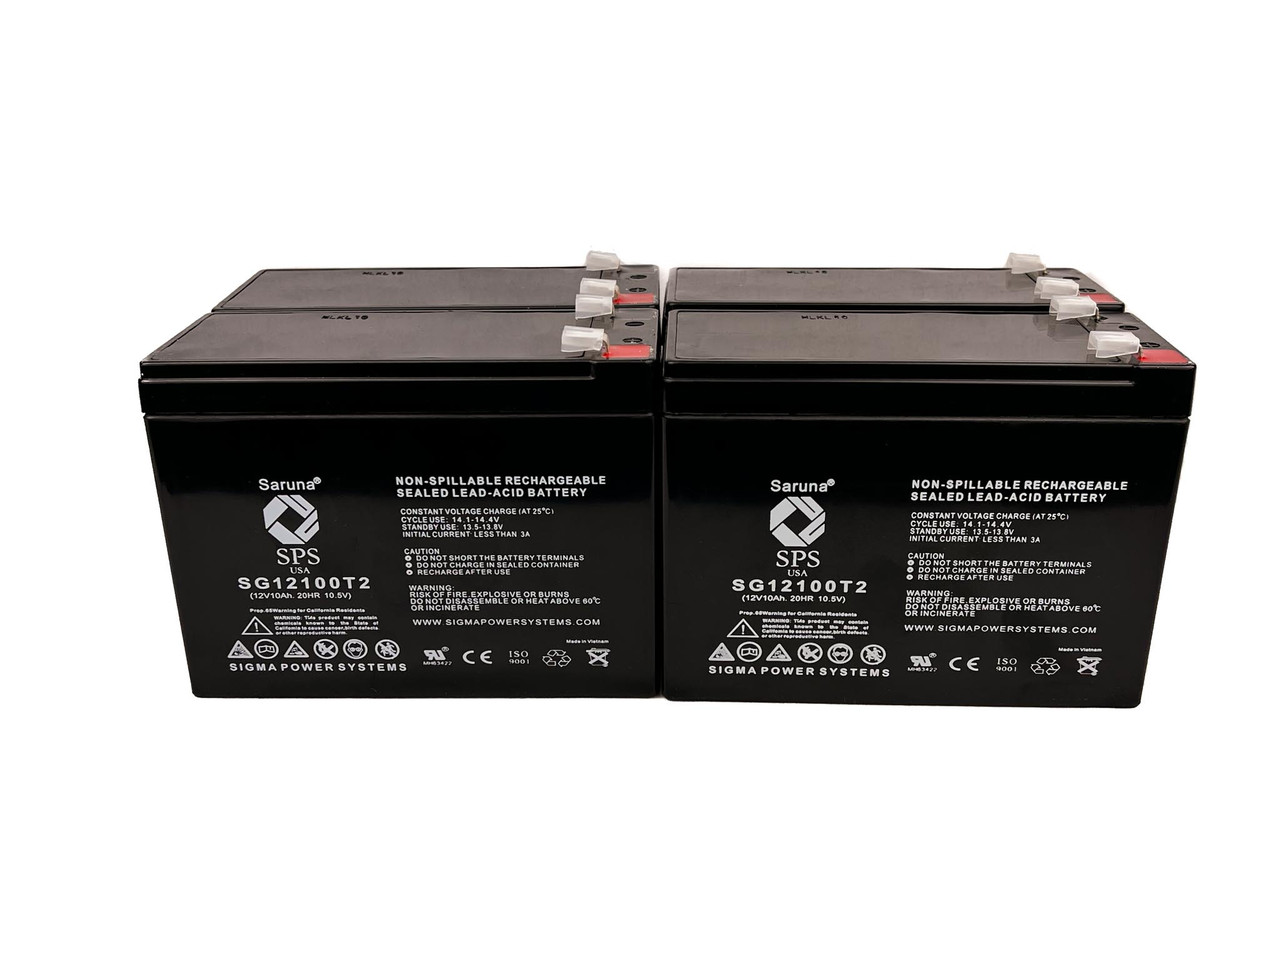 Raion Power 12V 10Ah Lead Acid Replacement Battery for NPP Power NP12-10Ah - 4 Pack